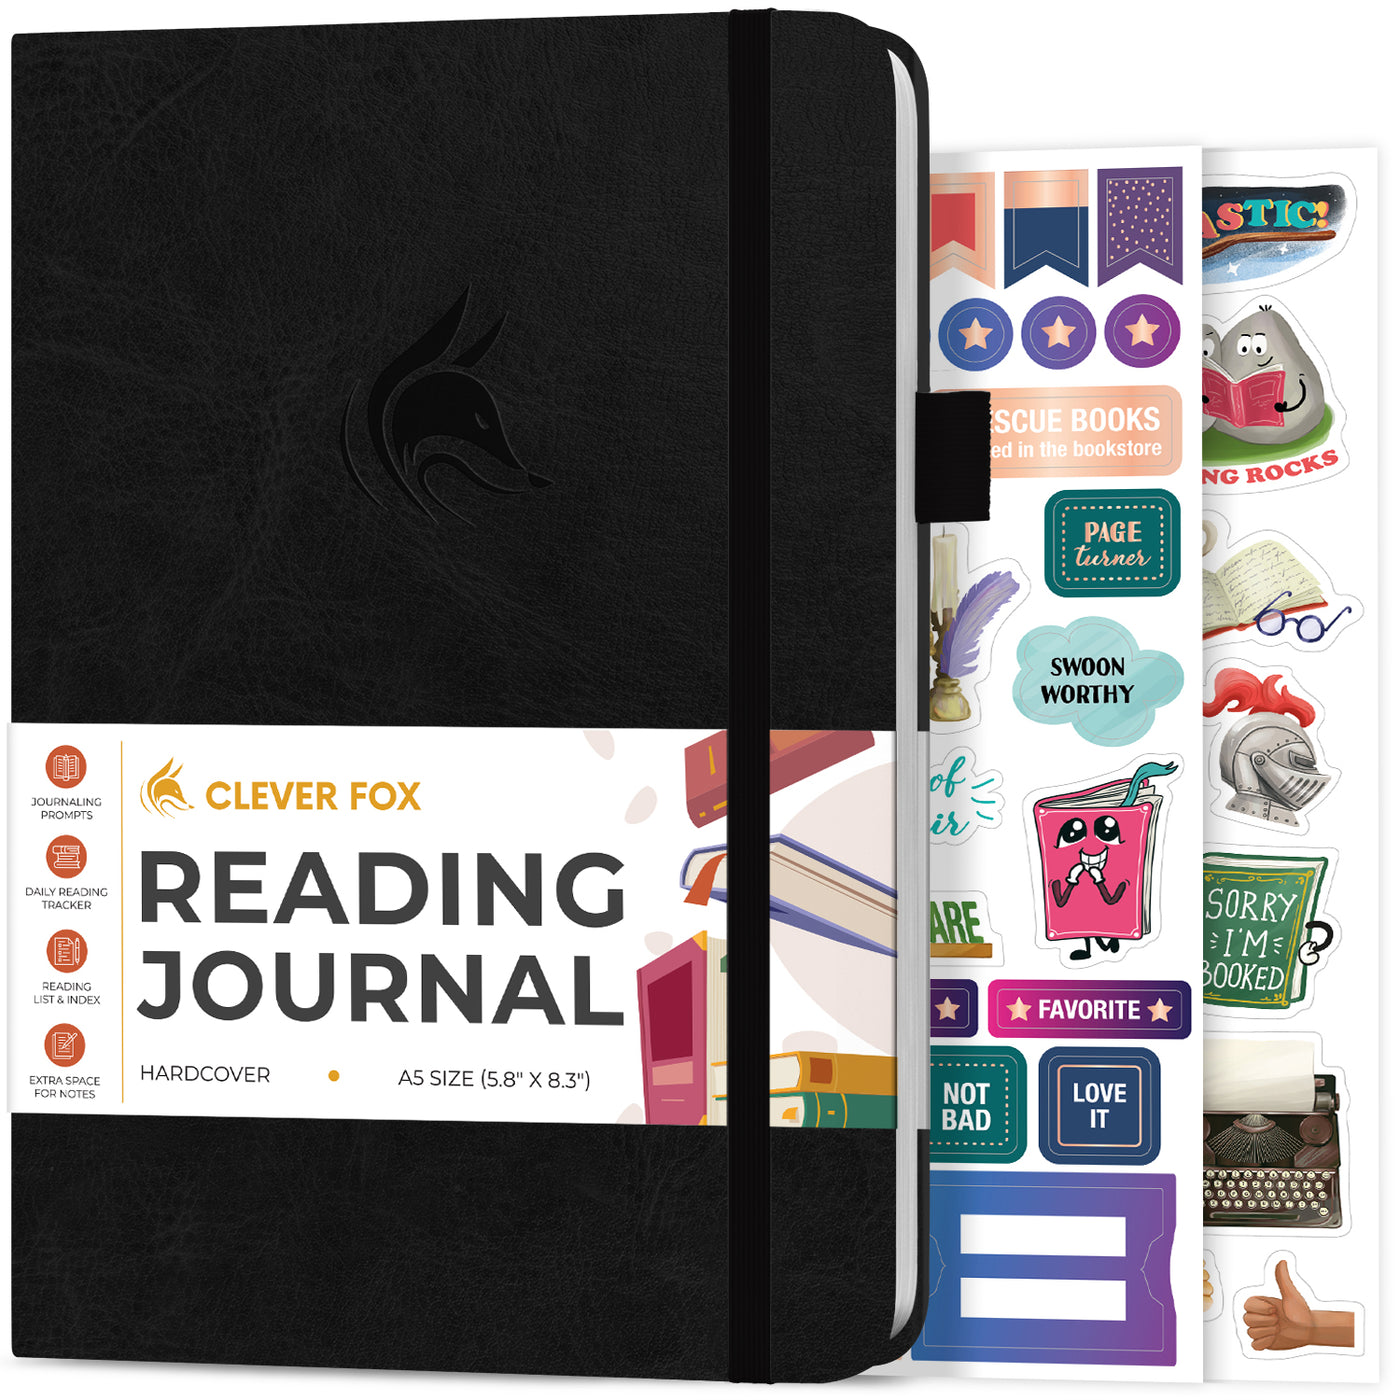 BiblioLifestyle - Reading Journals: Everything You Need To Know